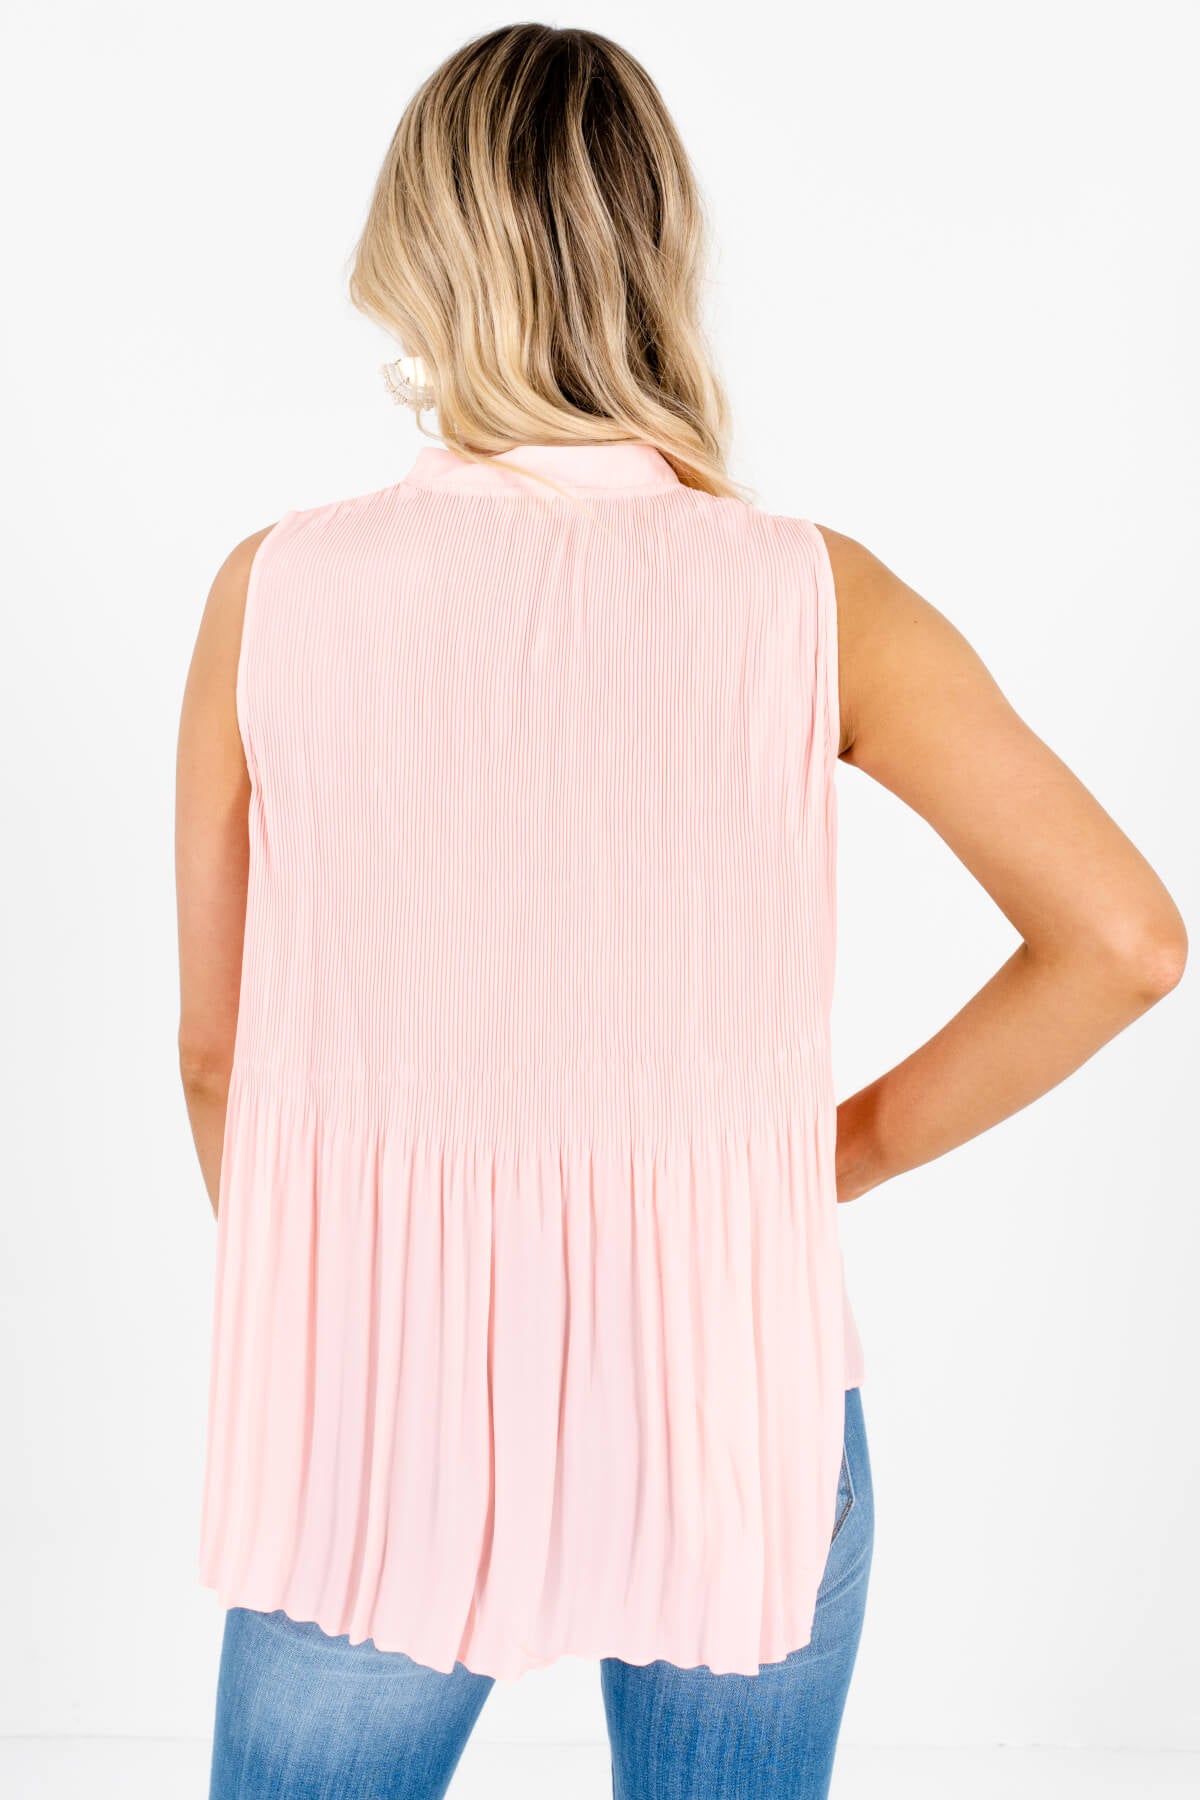 Pink Pleated Self-Tie Neckline Tank Tops Affordable Online Boutique